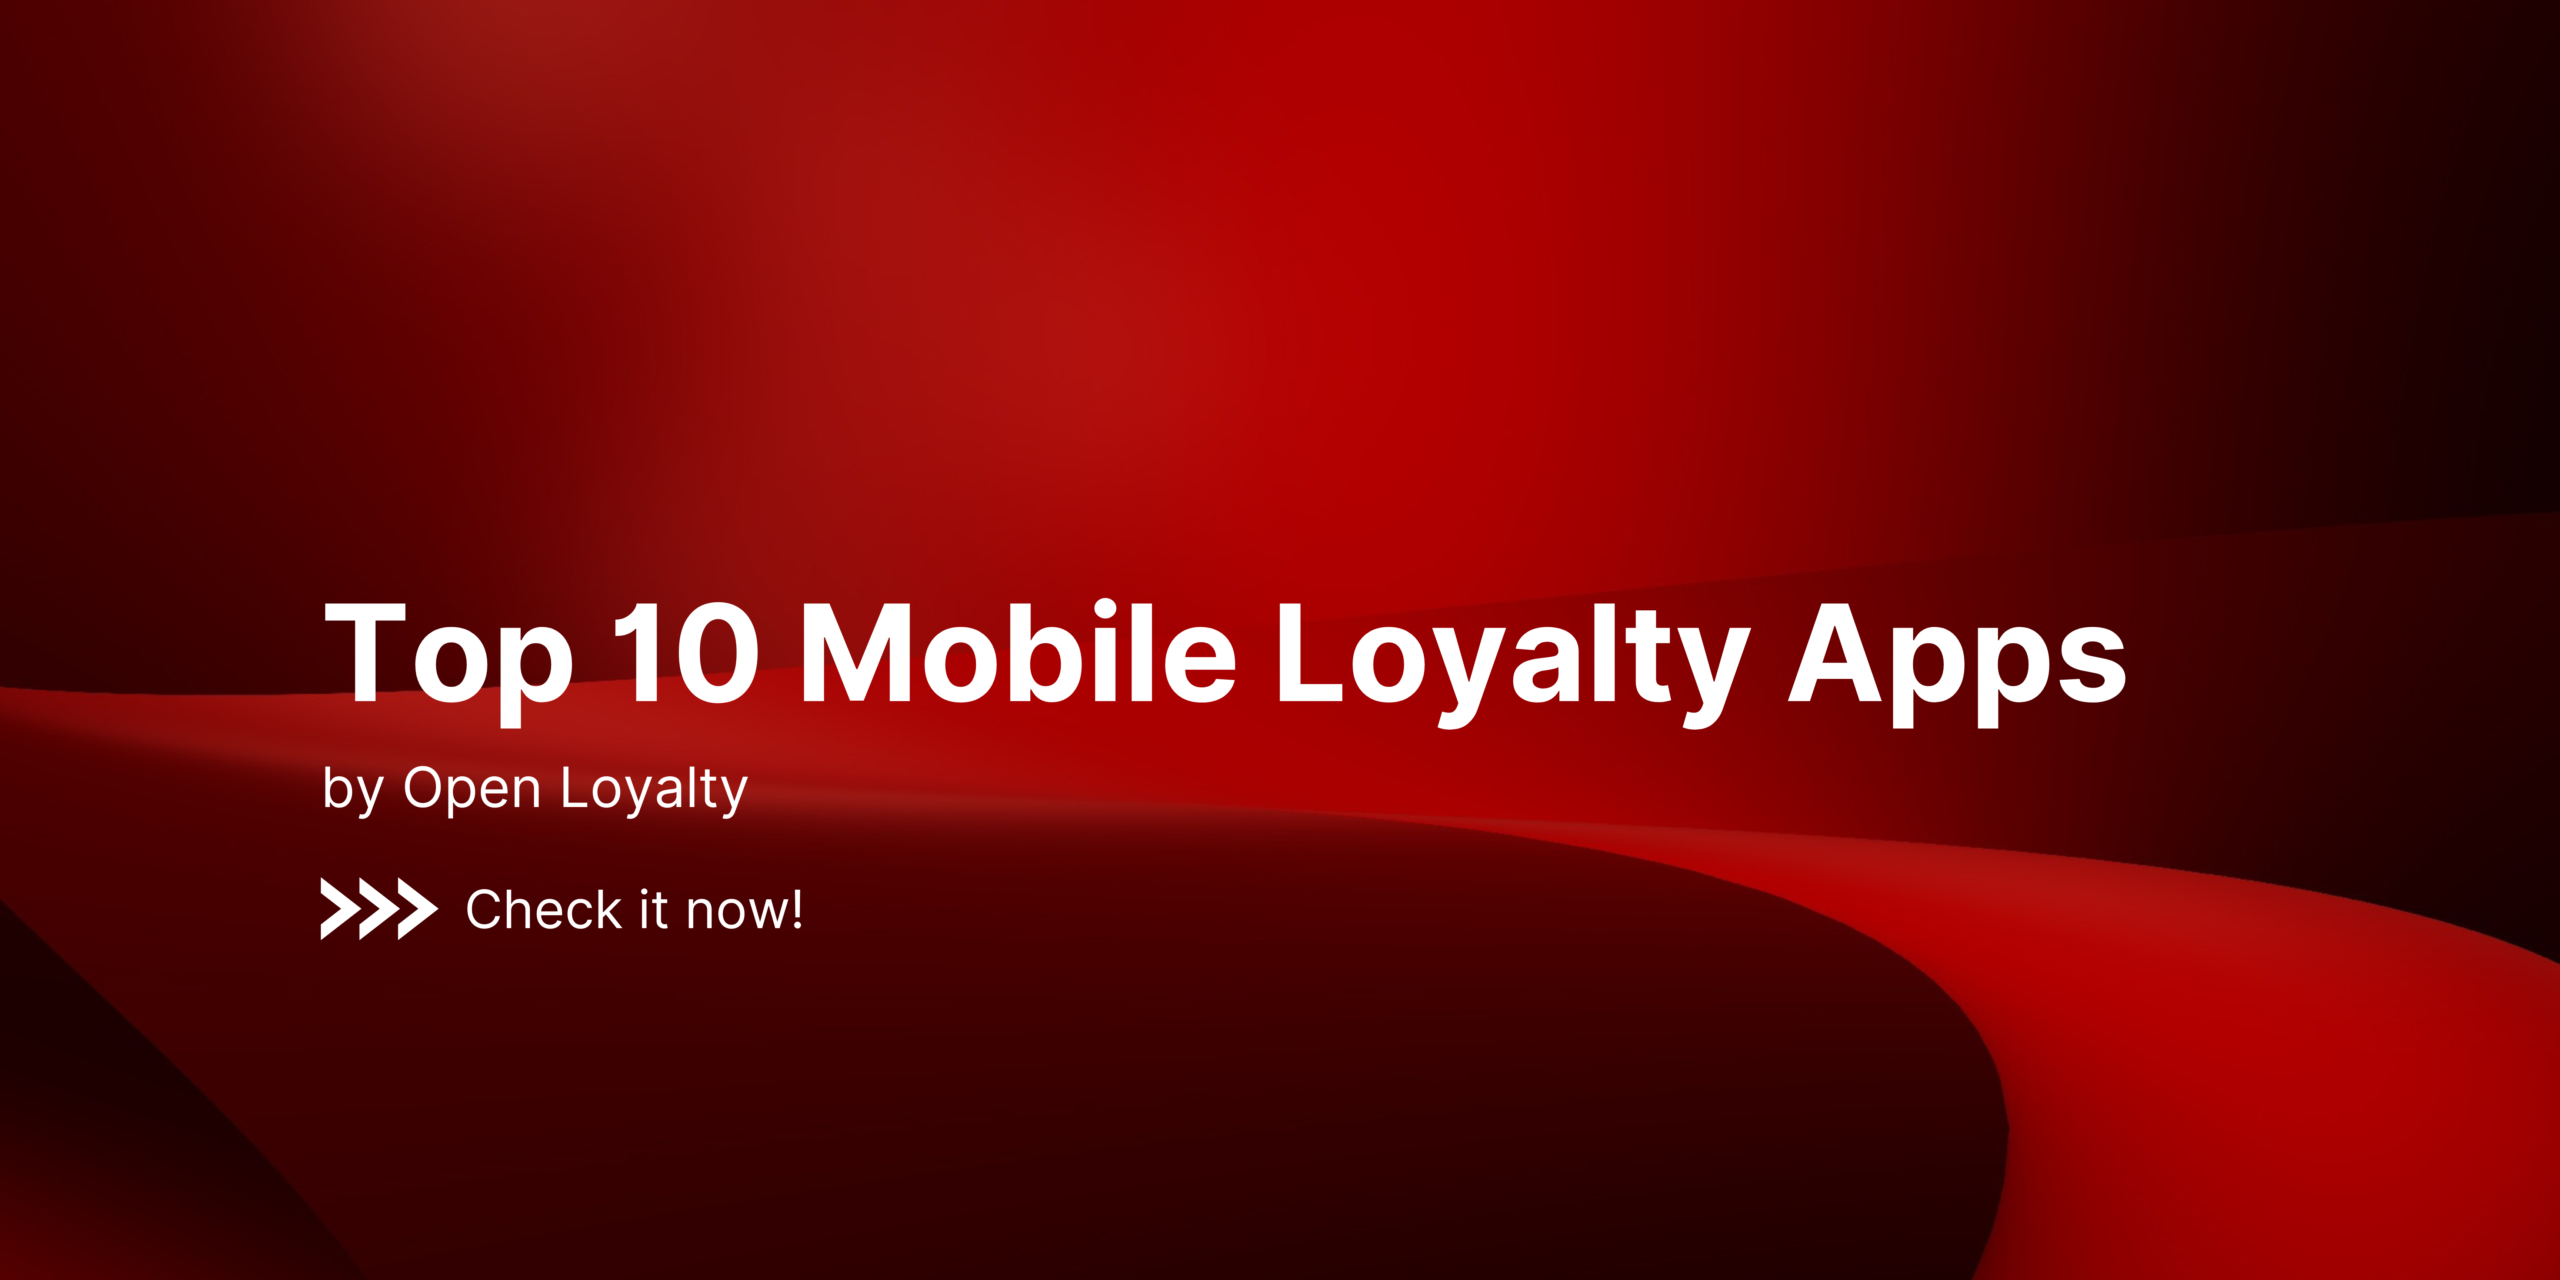 Top 10 Mobile Loyalty Apps by Open Loyalty